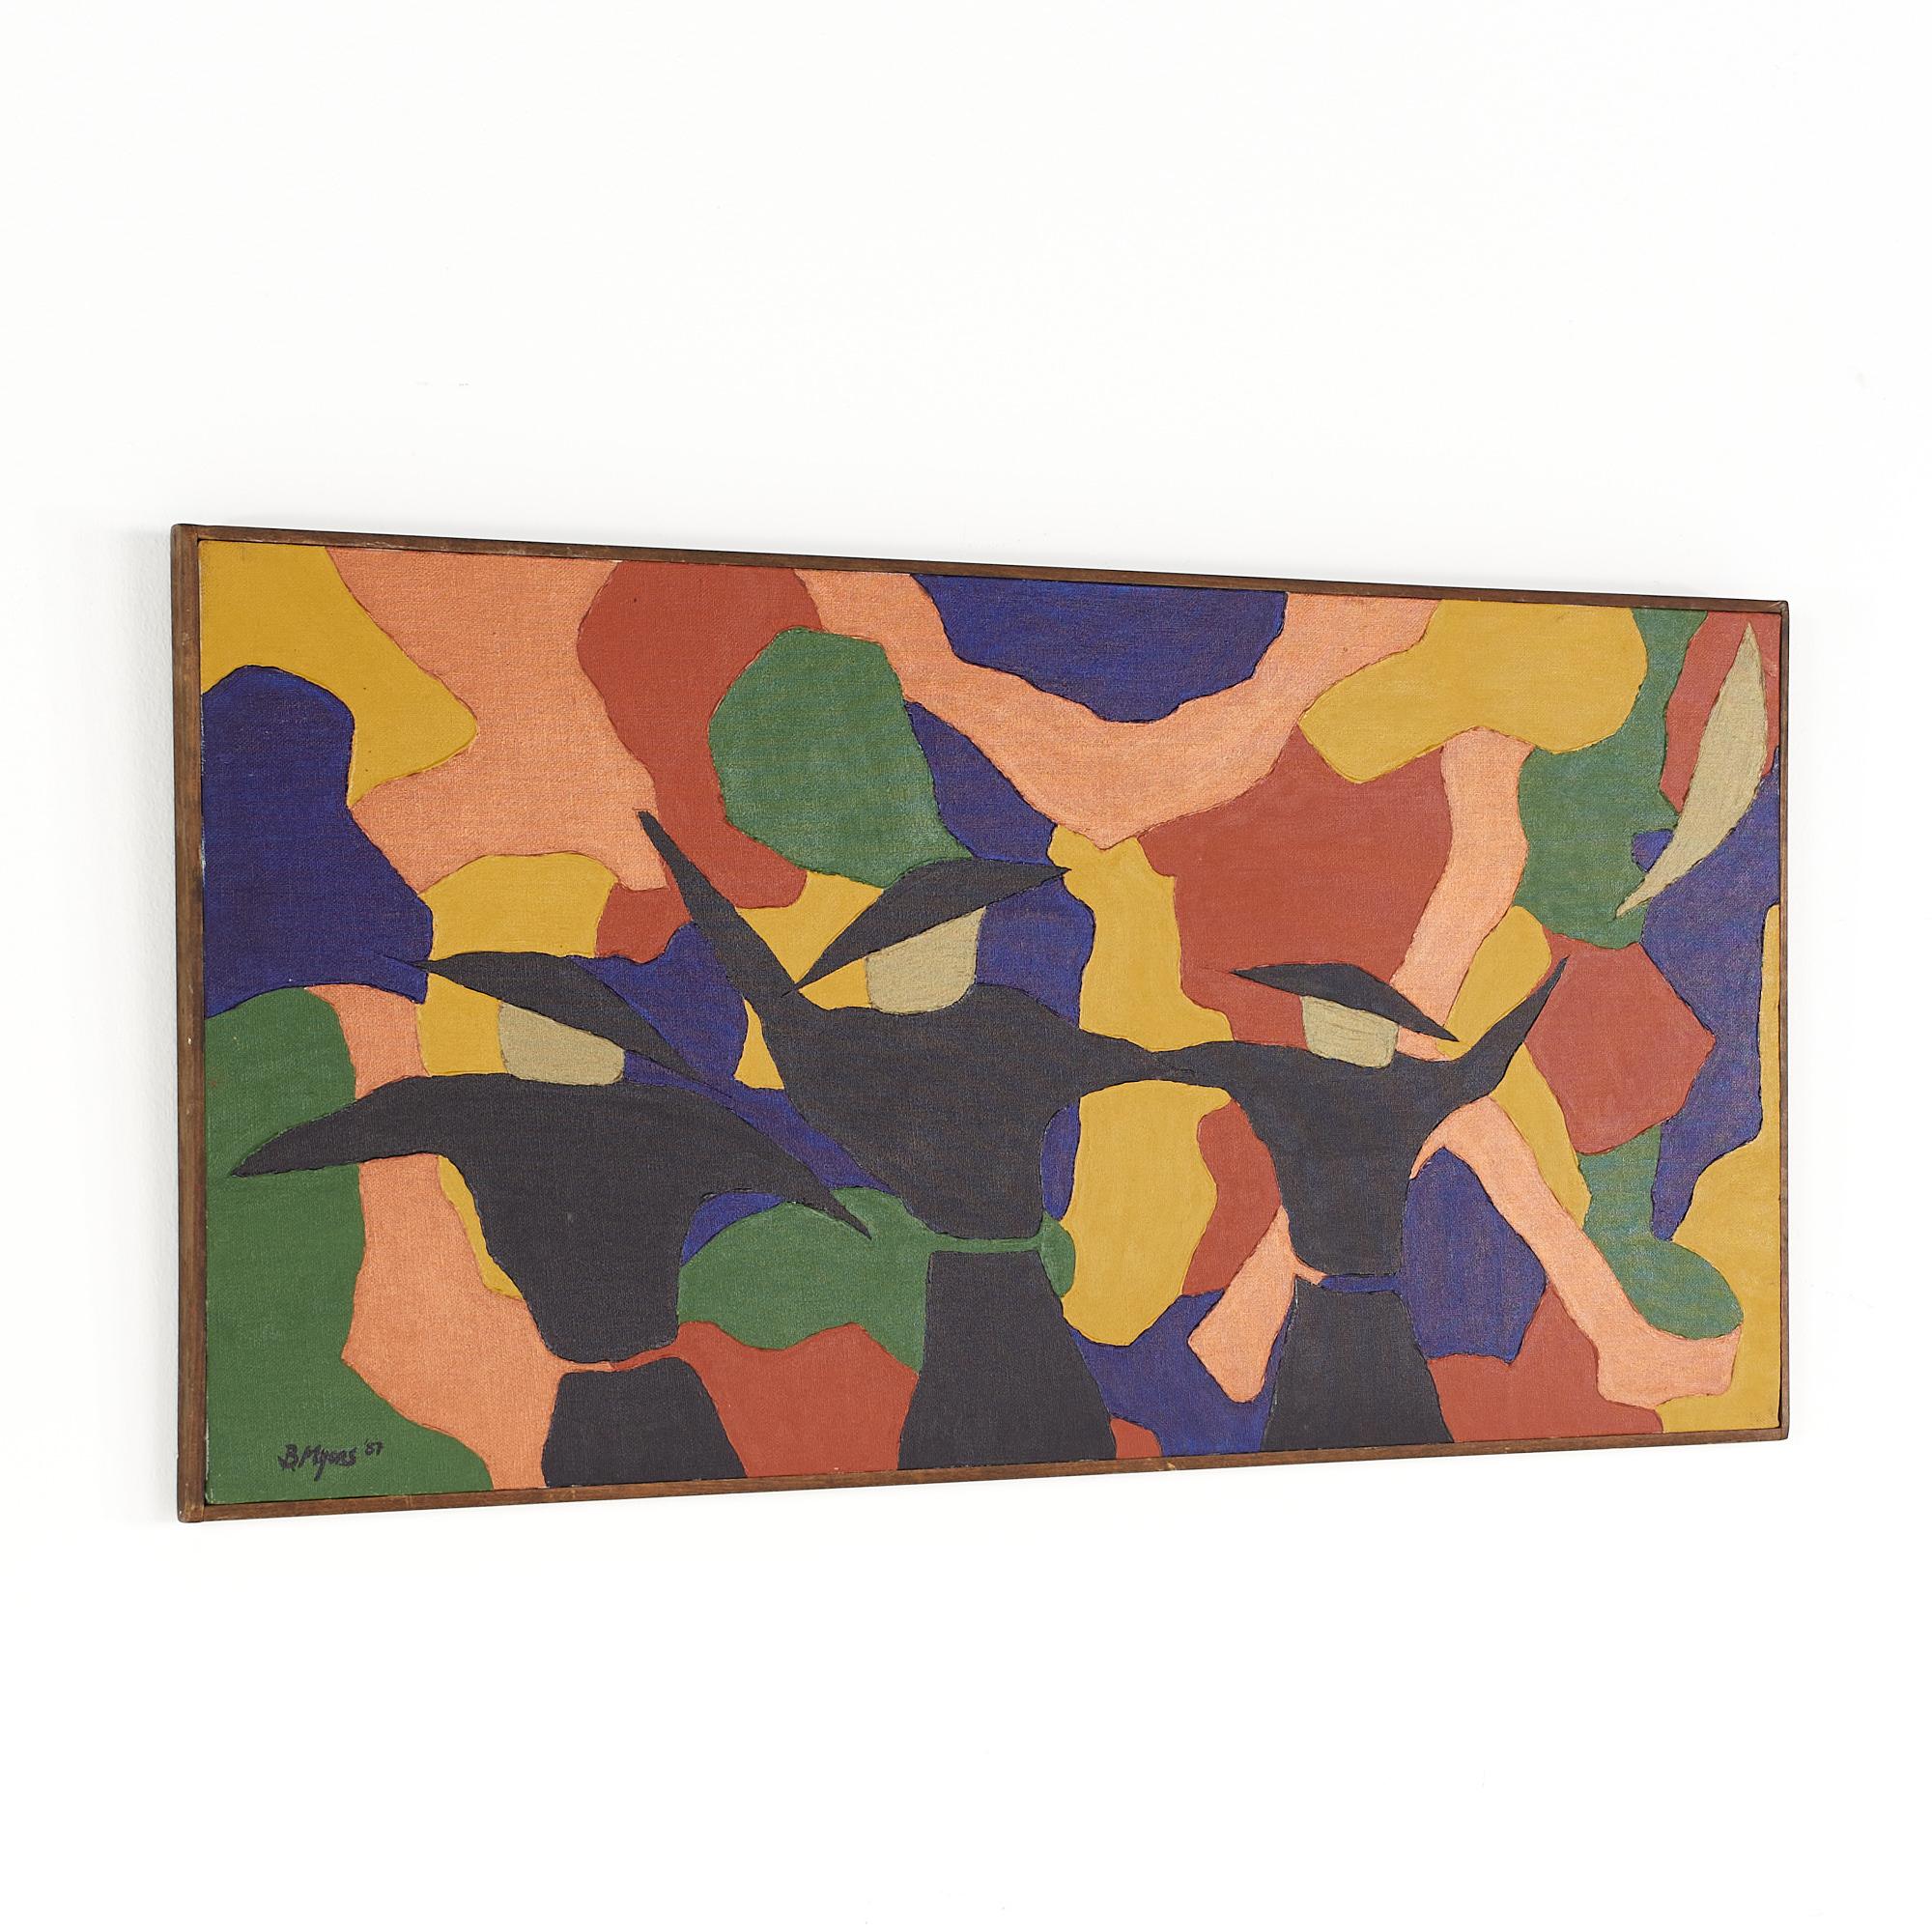 Bruce Myers mid century signed abstract original oil on canvas painting

This painting measures: 30.5 wide x .75 deep x 15.5 inches high

This painting is in good vintage condition.

We take our photos in a controlled lighting studio to show